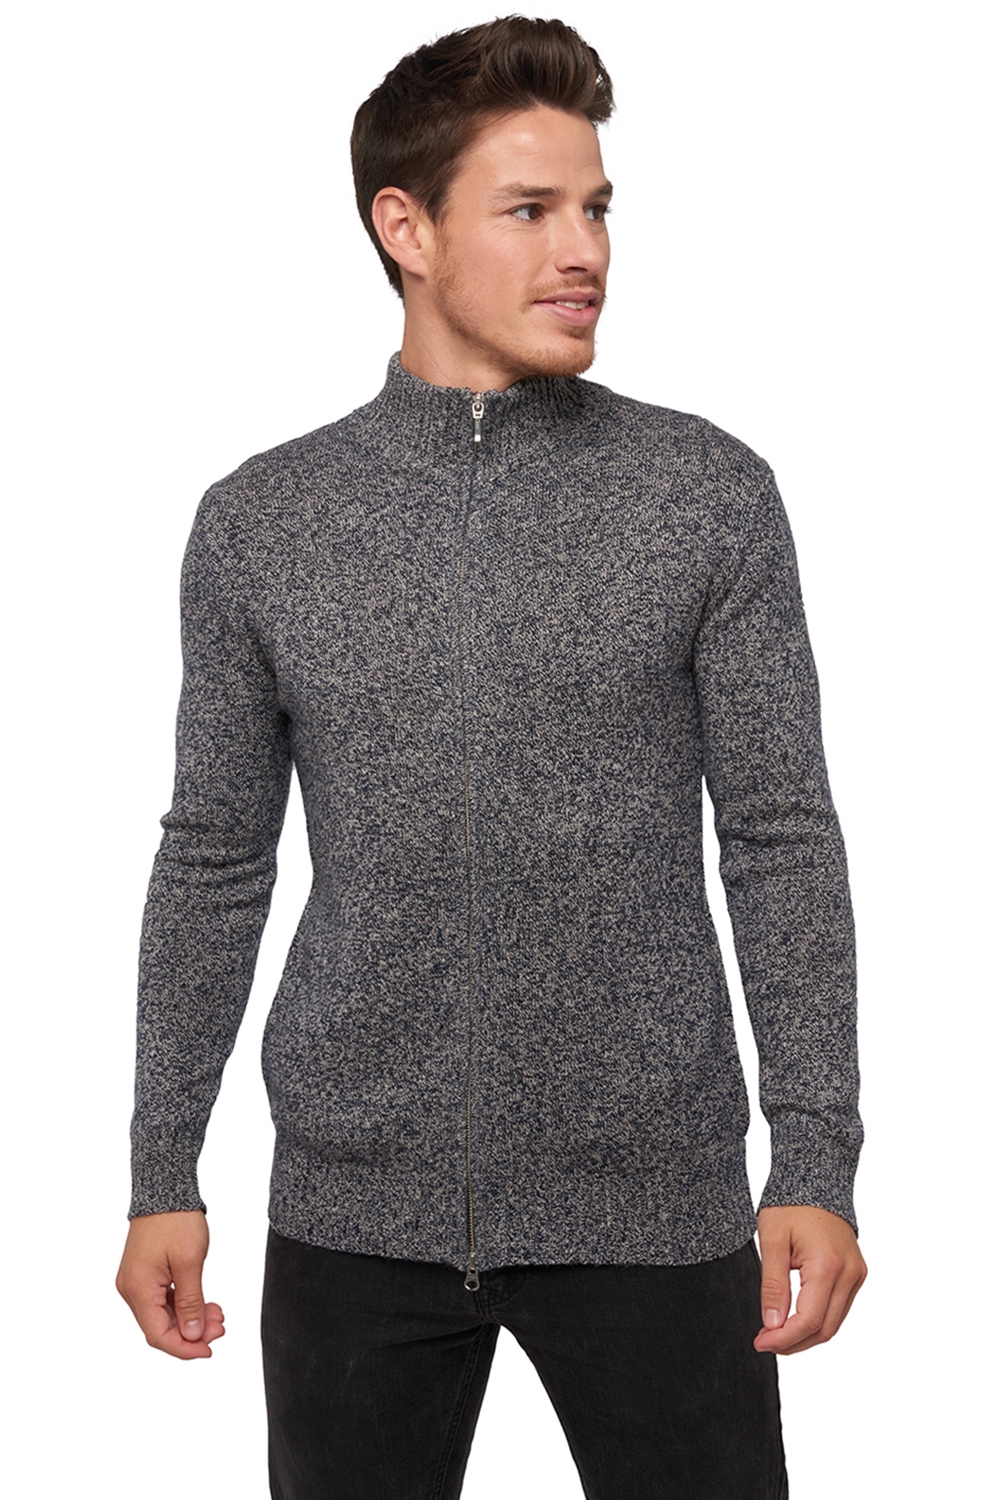 Chameau pull homme clyde voyage xl